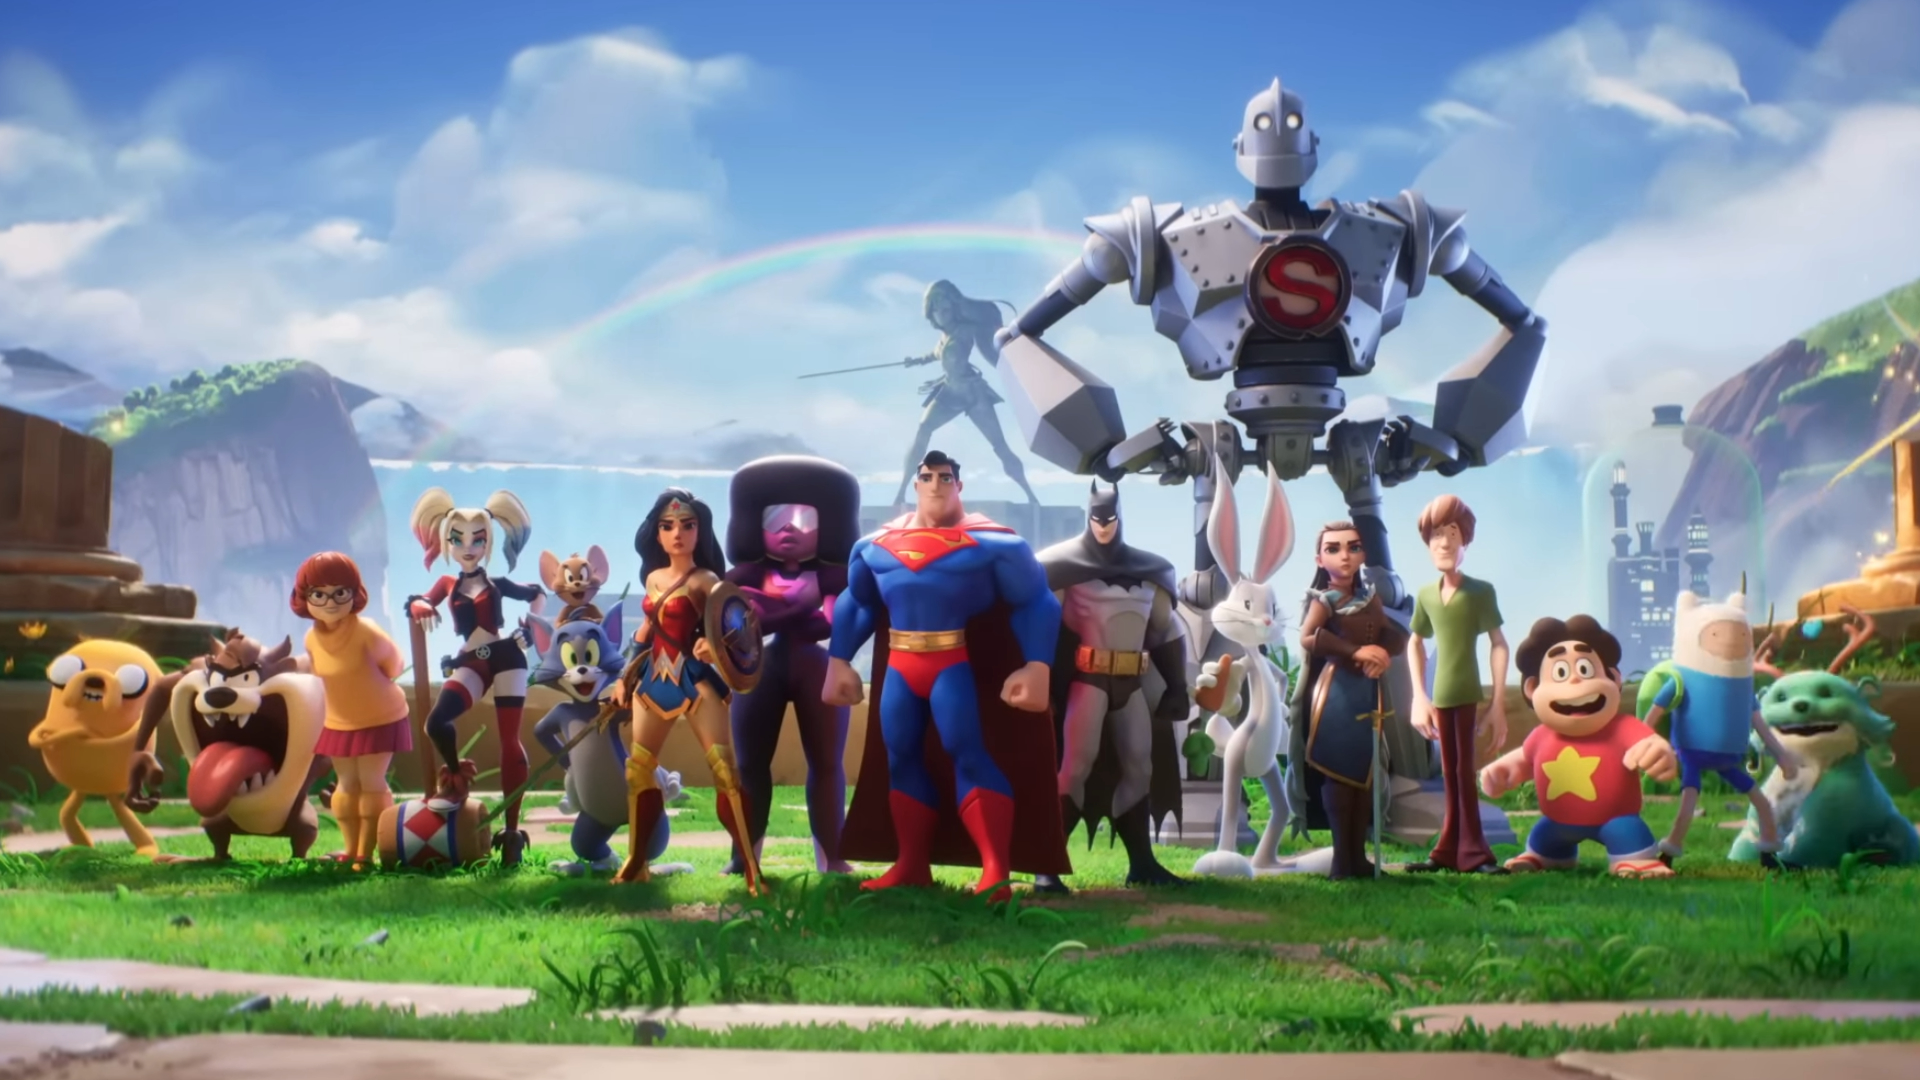 The original MultiVersus line-up pose in a row against an outdoor stage. From L-R: Jake the Dog, Taz, Velma, Harley Quinn, Tom and Jerry, Wonder Woman, Garnet, Superman, The Iron Giant, Bugs Bunny, Arya Stark, Shaggy, Steven Universe, Finn the Human, and Reindog.